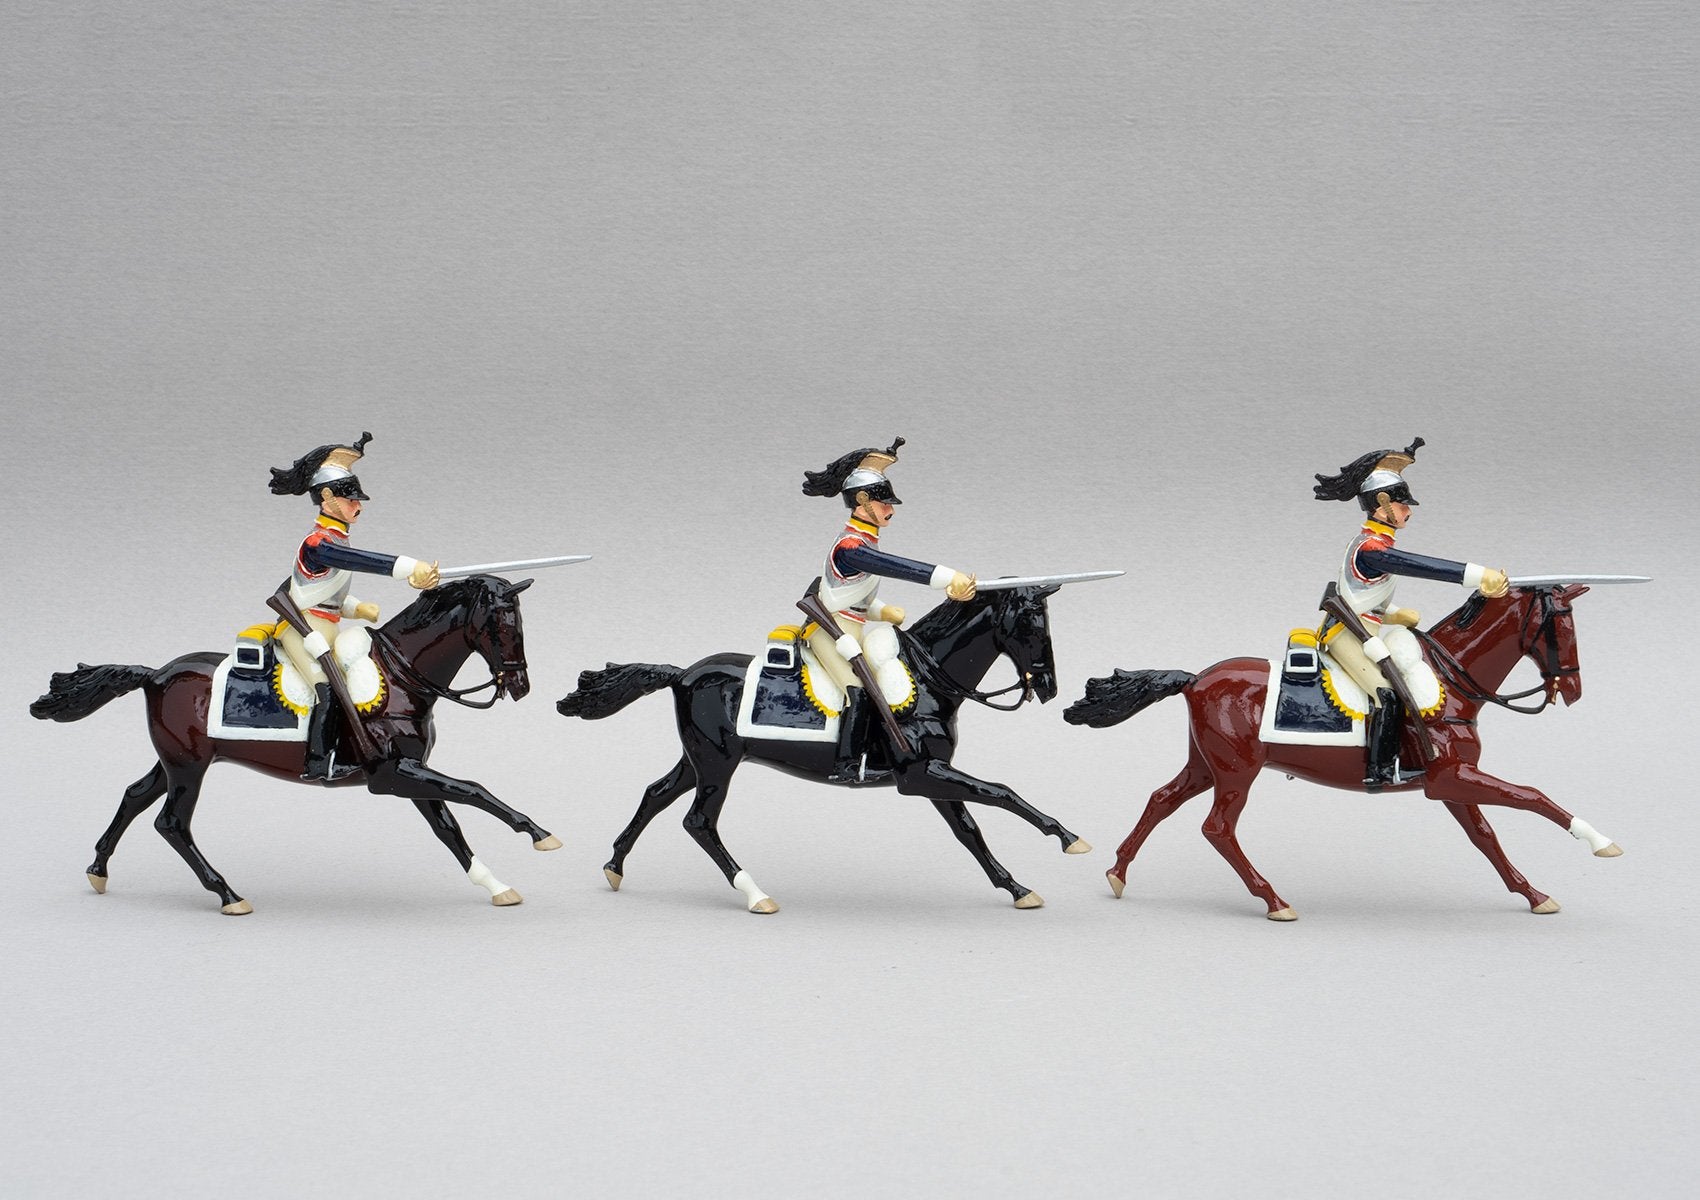 Set 143 Cuirassiers | French Cavalry | Napoleonic Wars | Three mounted heavy cavalrymen with sabres drawn | Waterloo | © Imperial Productions | Sculpt by David Cowe